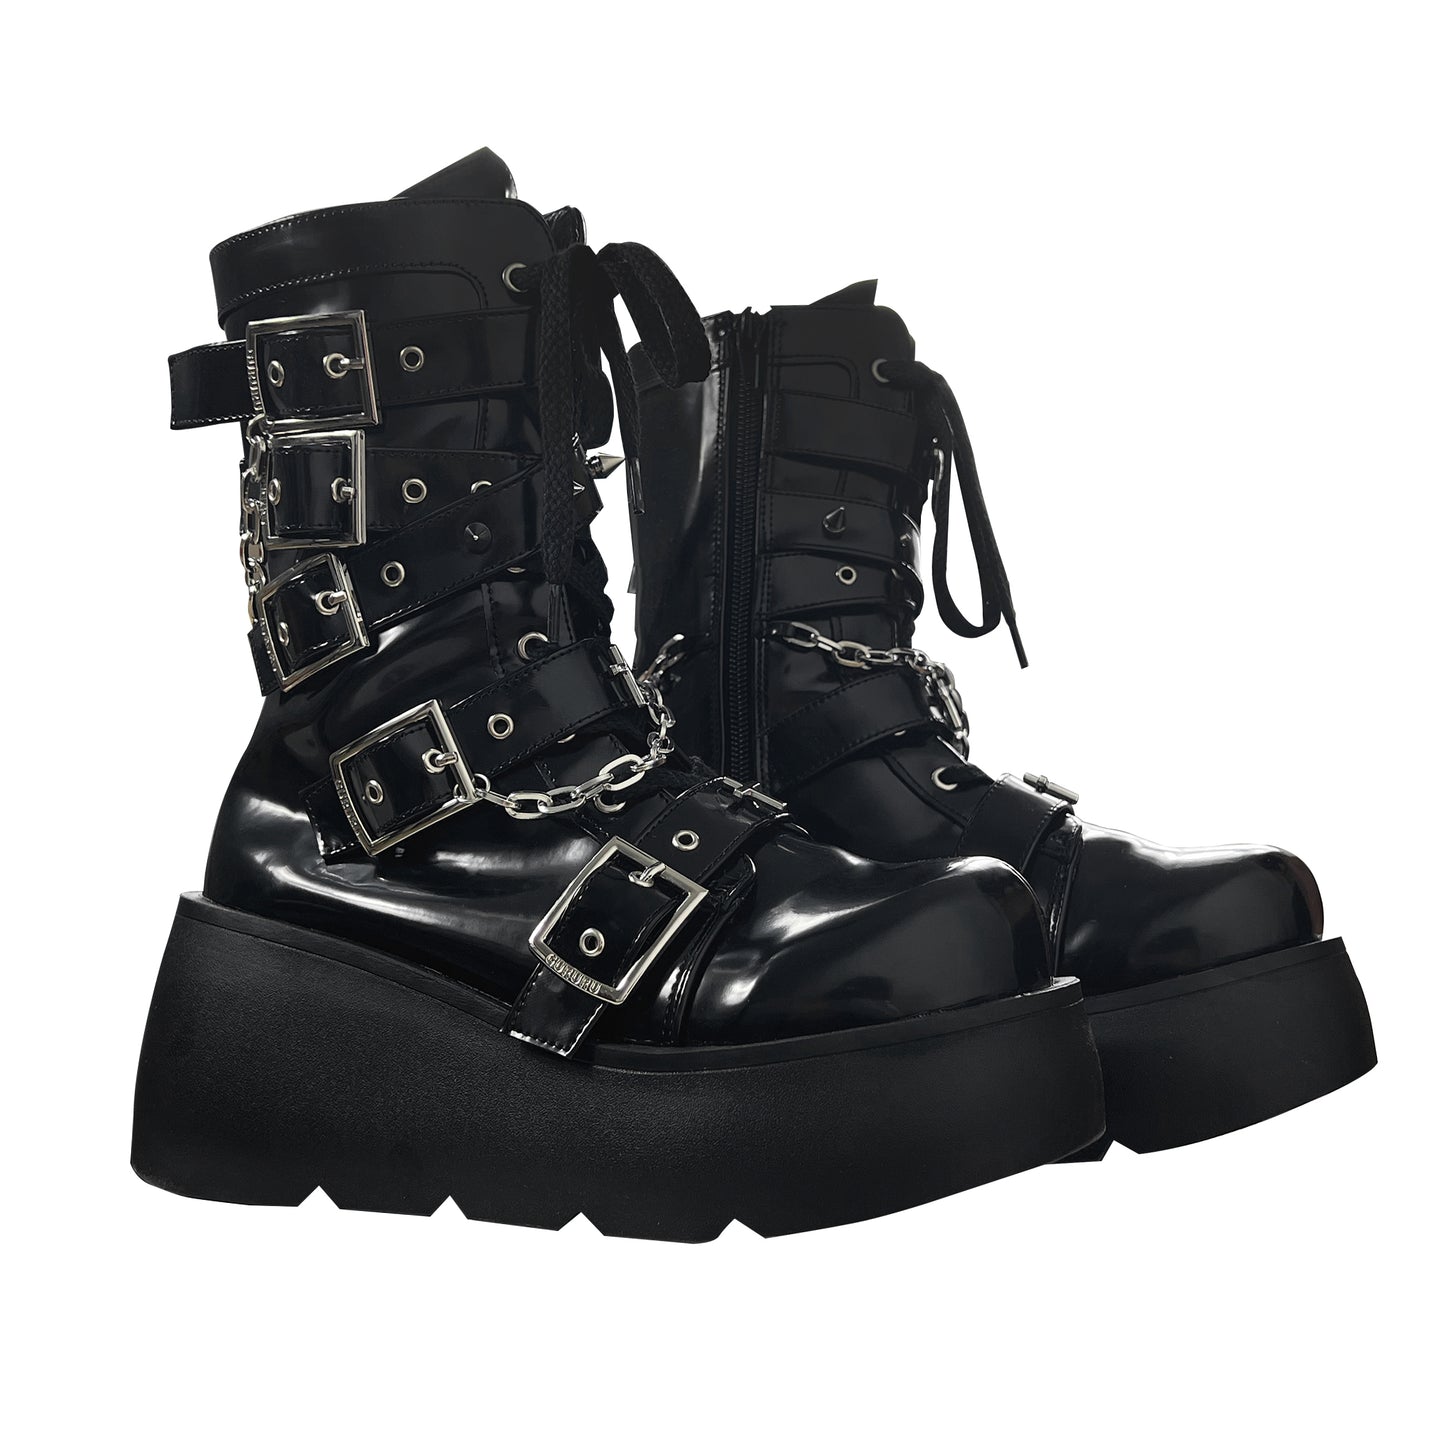 Y2K Spicy Girl Cross Black White Platform Shoes Boots 28962:343936